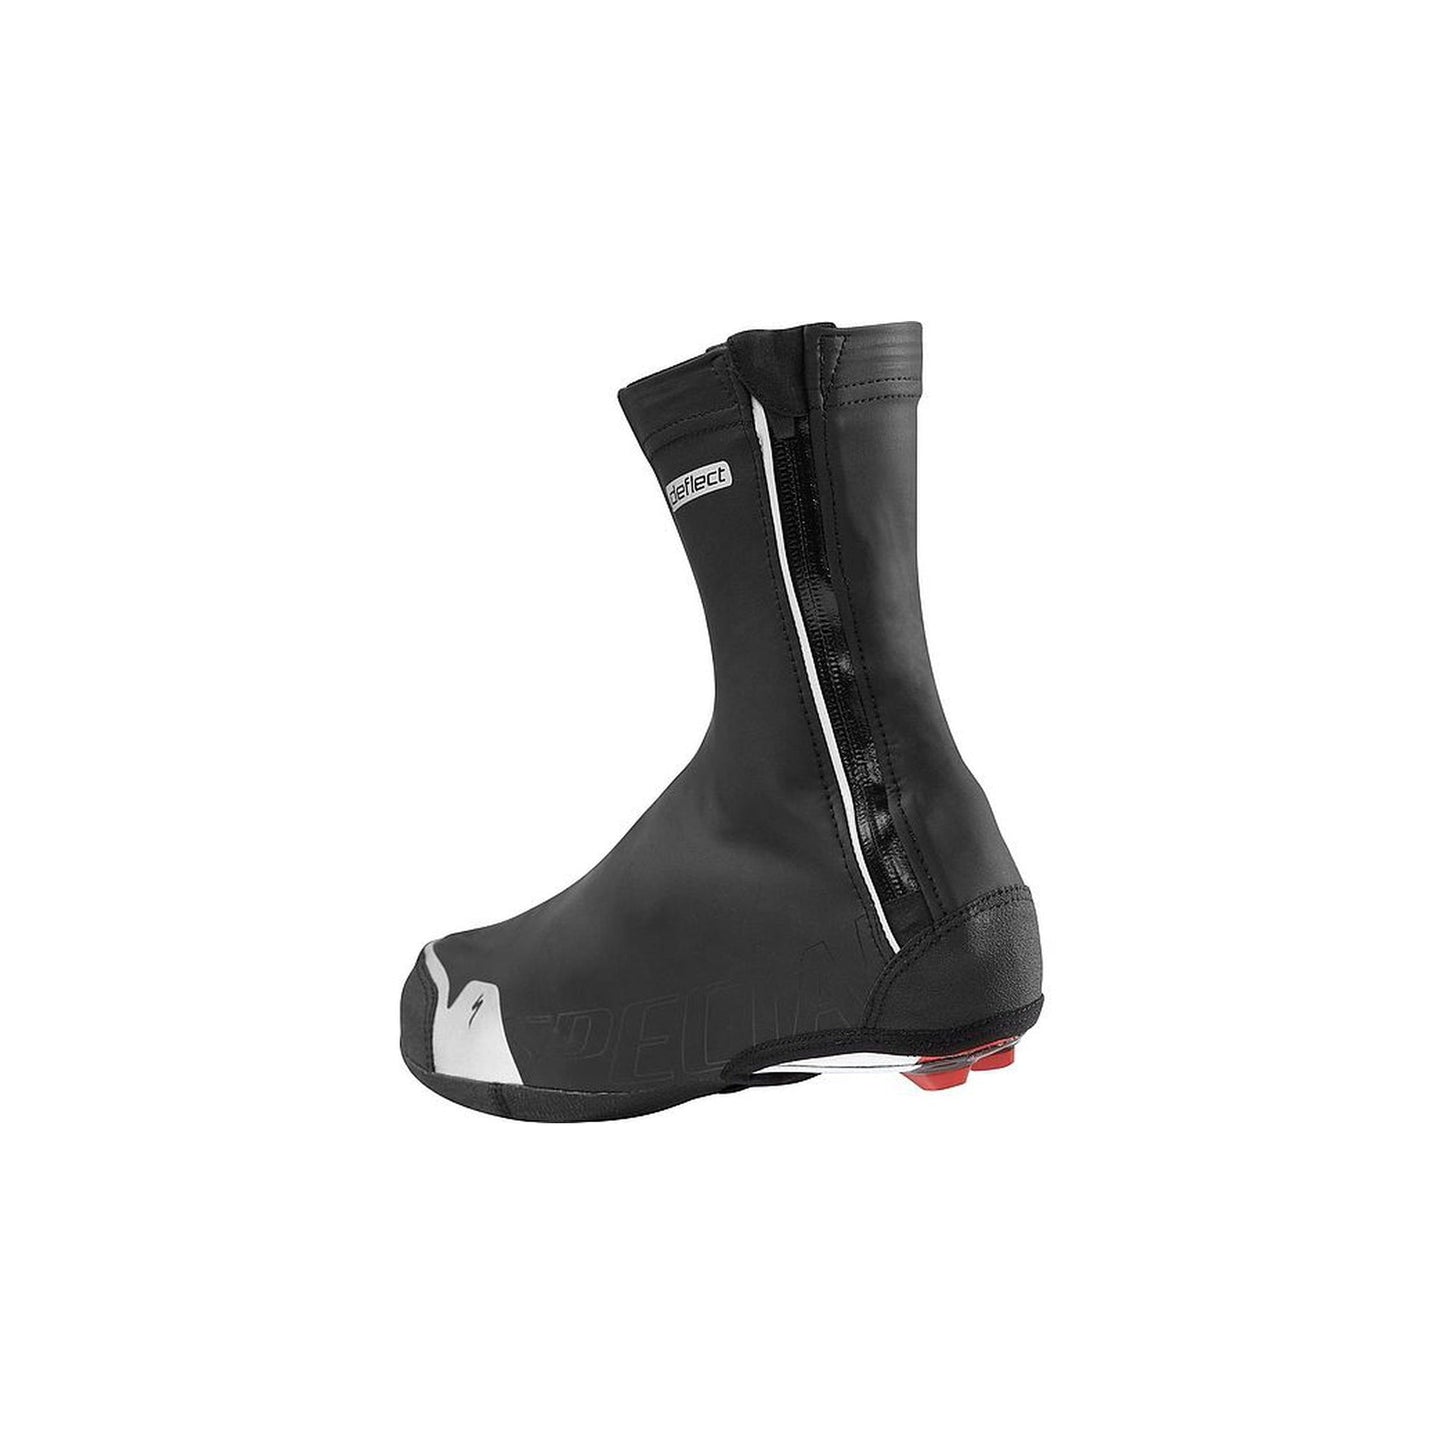 COMP RAIN SHOE COVER BLK 38-40-Cycles Direct Specialized